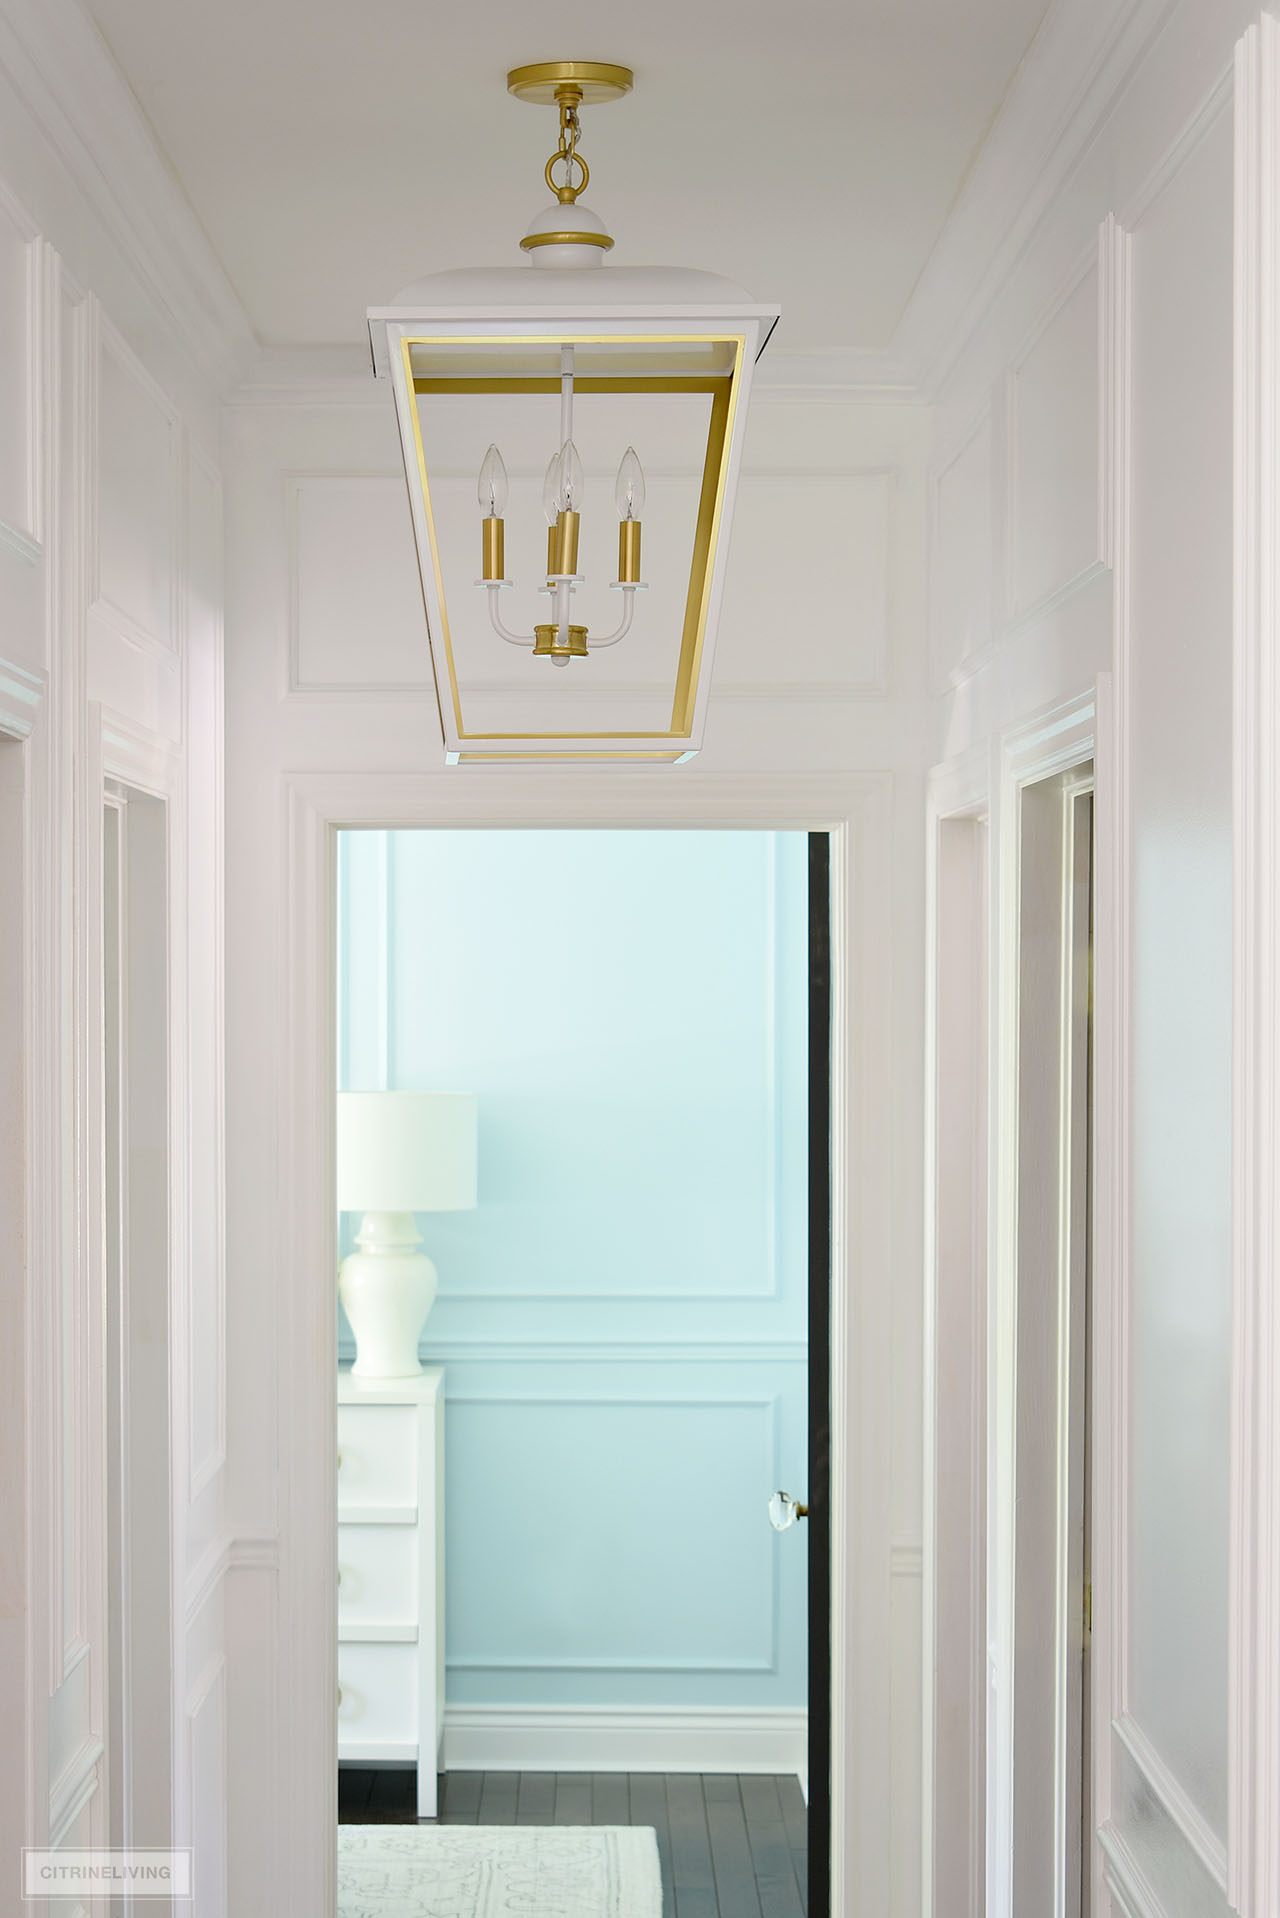 An oversized lantern pendant light in white and gold hangs in a small hallway painted Ultra Pure White by Behr.